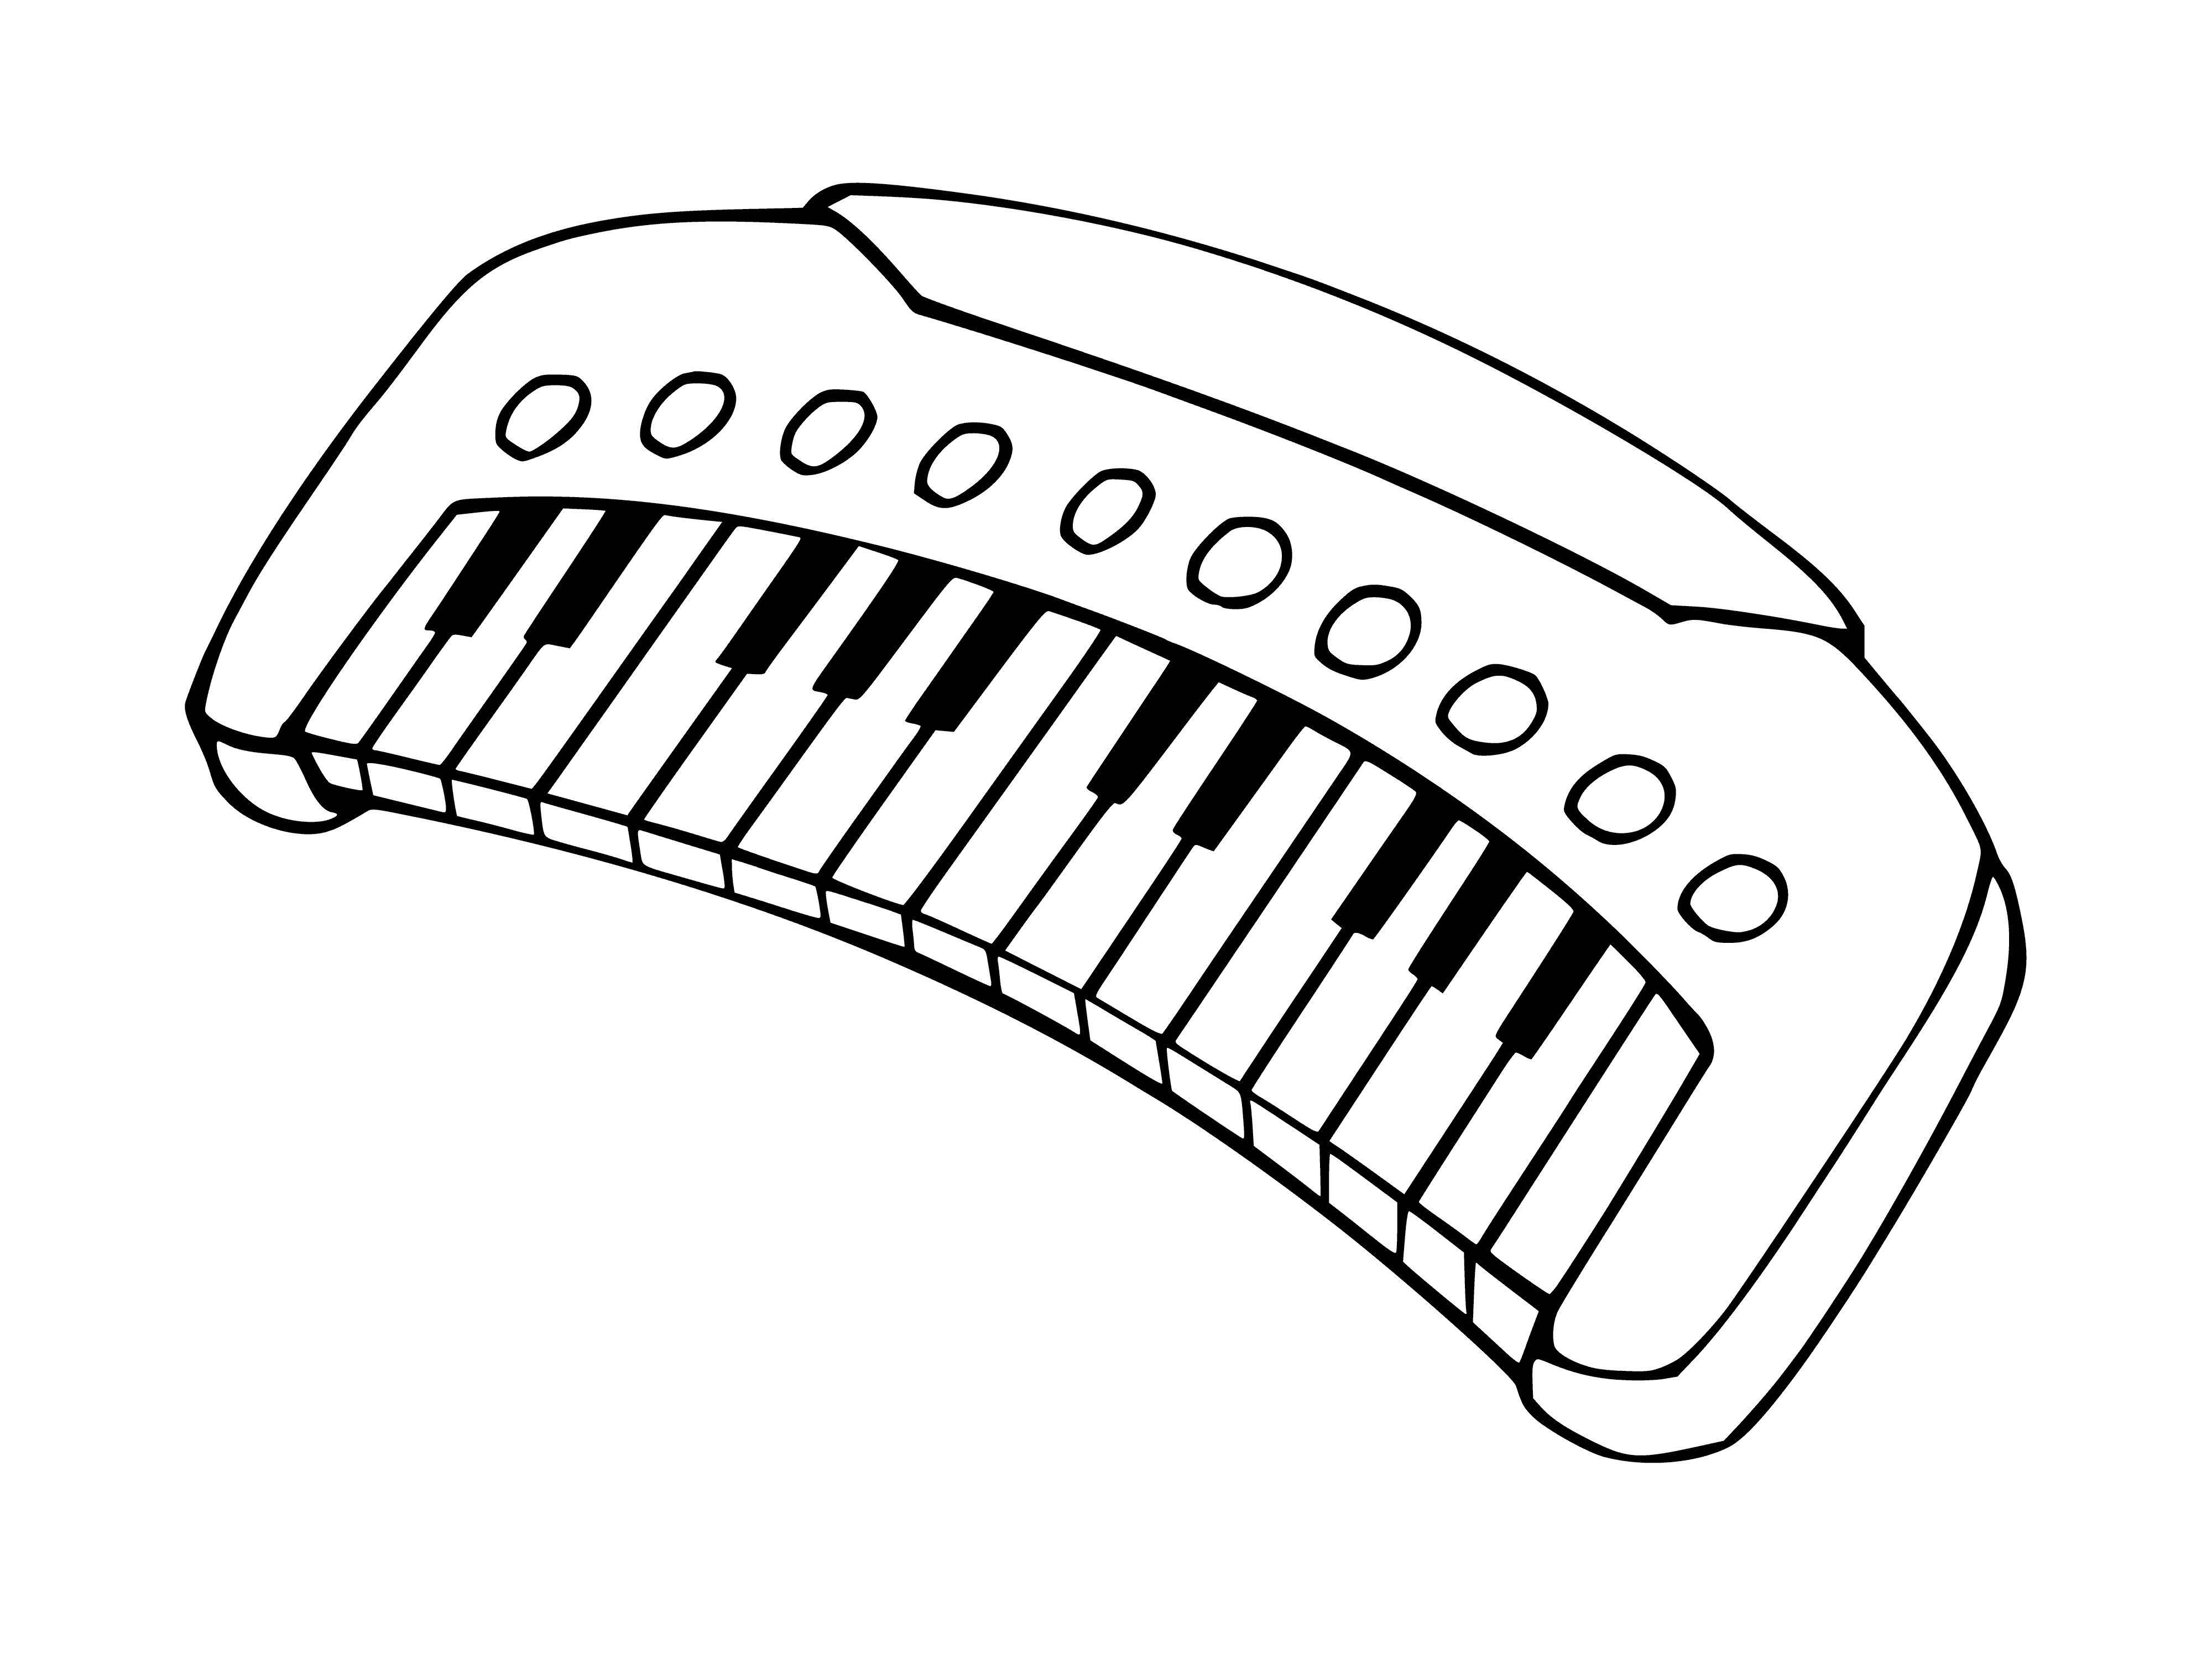 Synthesizer coloring page